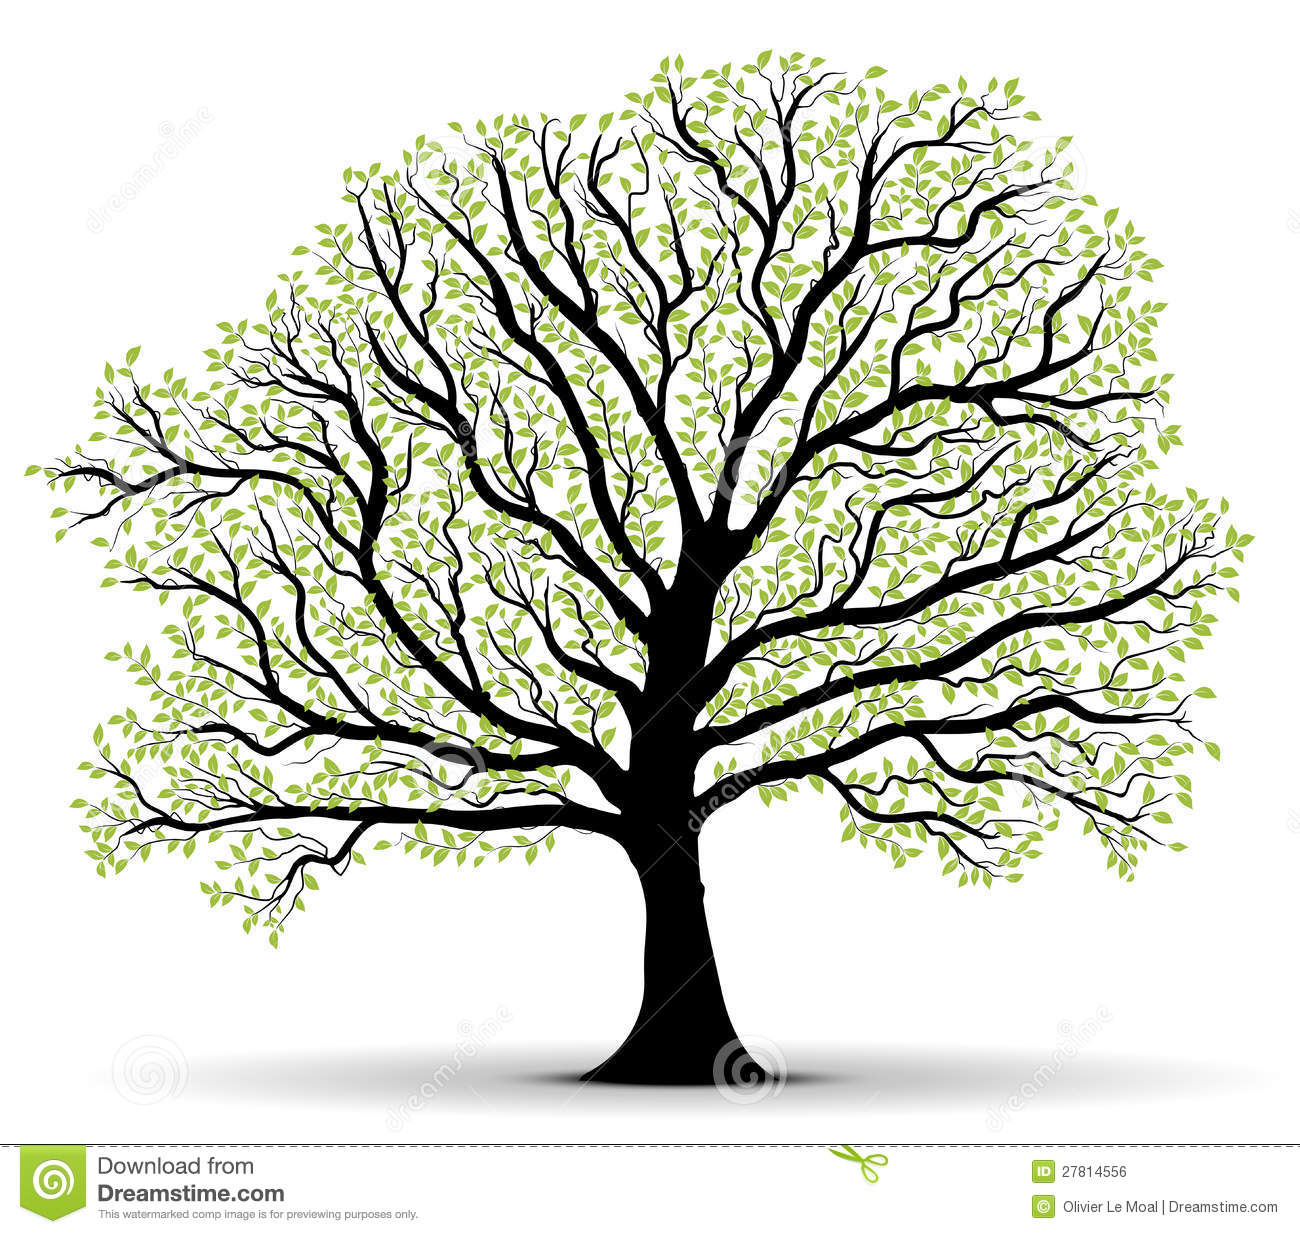 Big Vector Tree Silhouette With Green Foliage Over White Background